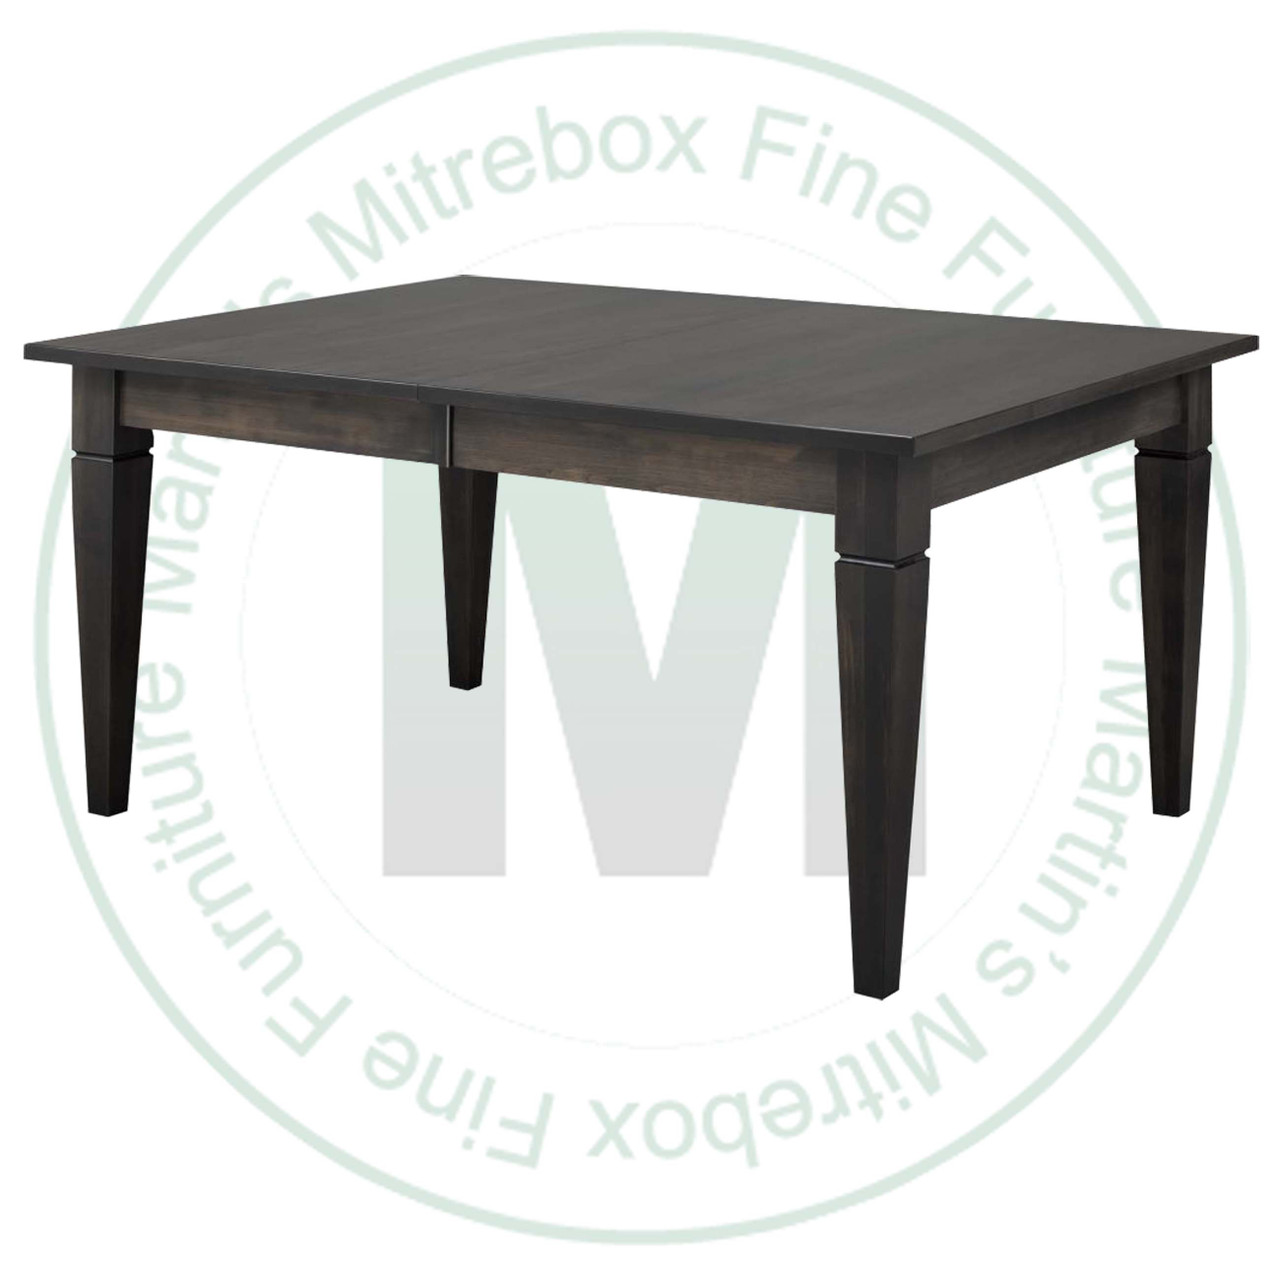 Wormy Maple Reesor Extension Harvest Table 36''D x 84''W x 30''H With 2 - 12'' Leaves Table Has 1'' Thick Top